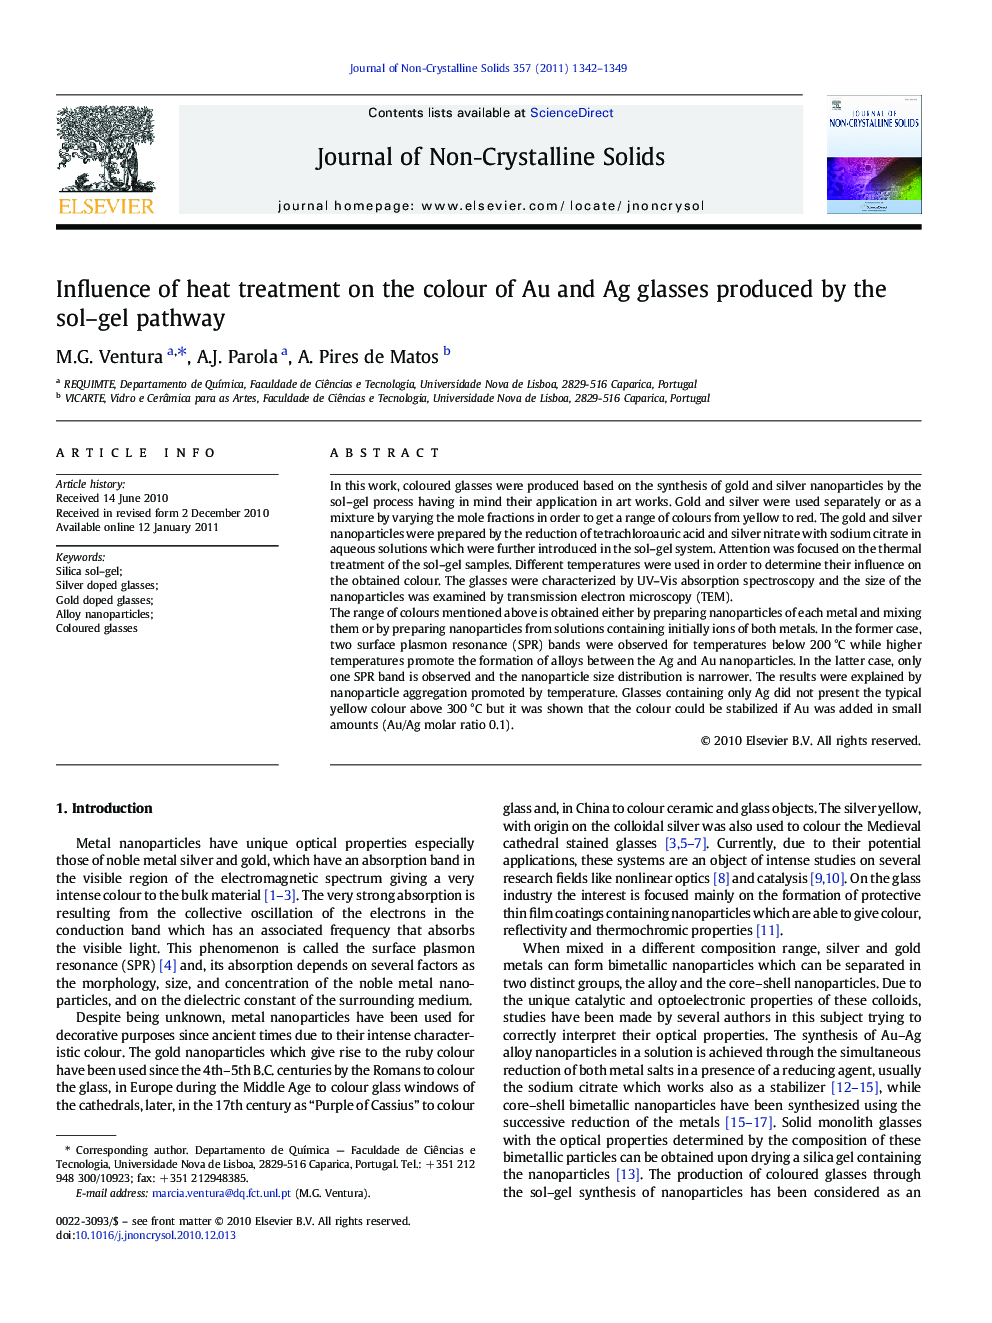 Influence of heat treatment on the colour of Au and Ag glasses produced by the sol–gel pathway